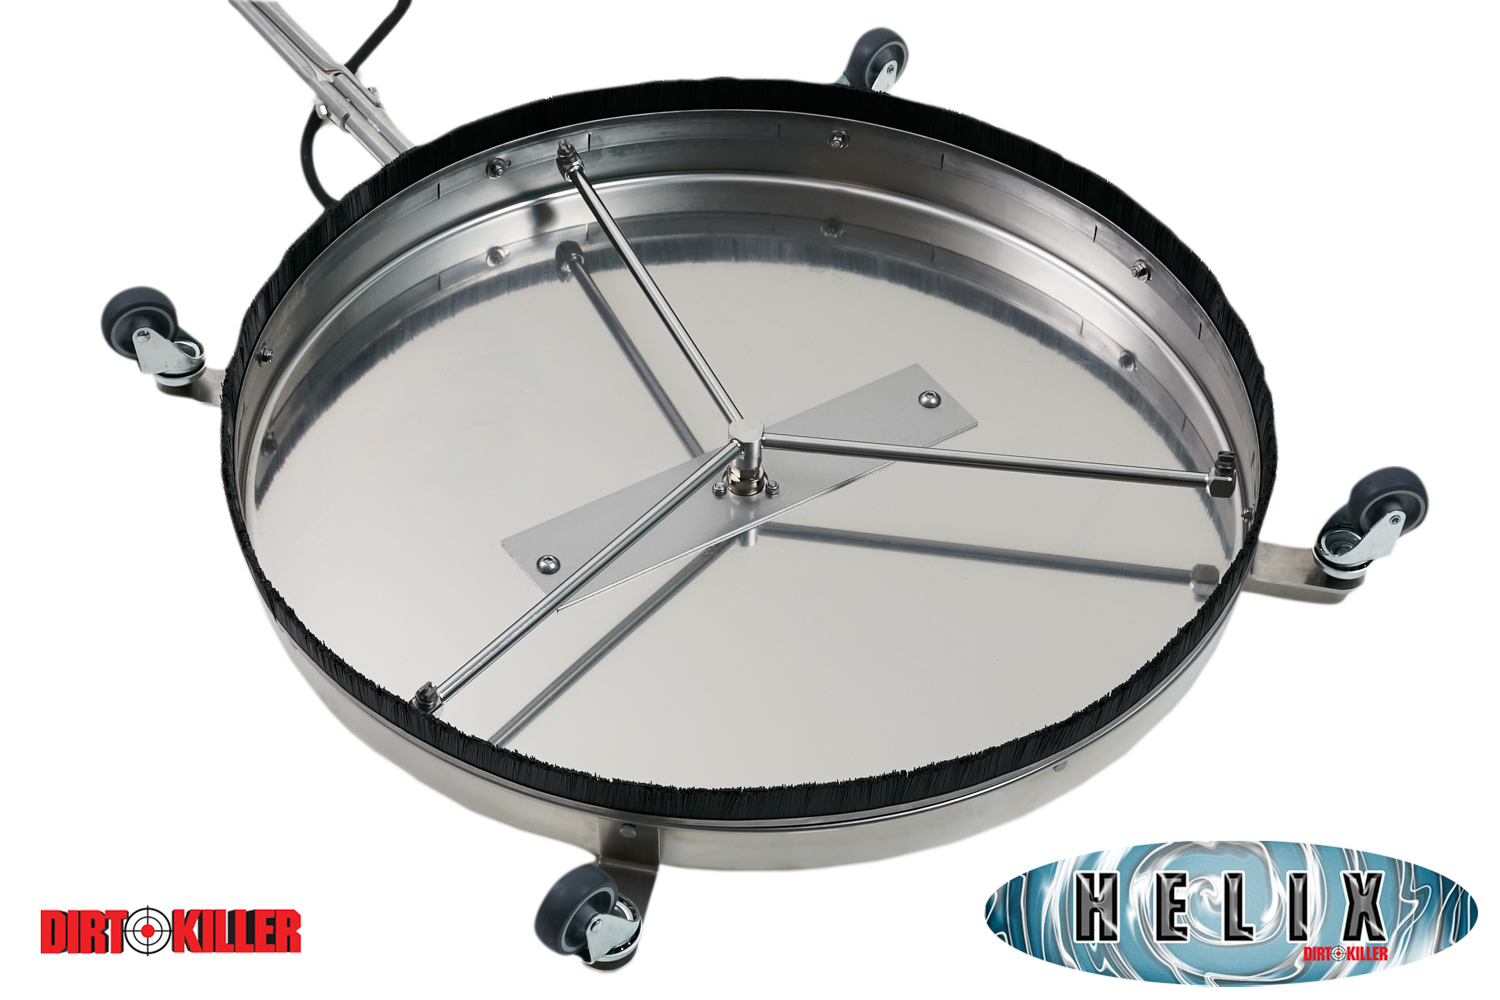 DK Helix Flat Surface Cleaner 30" Diameter Stainless Steel